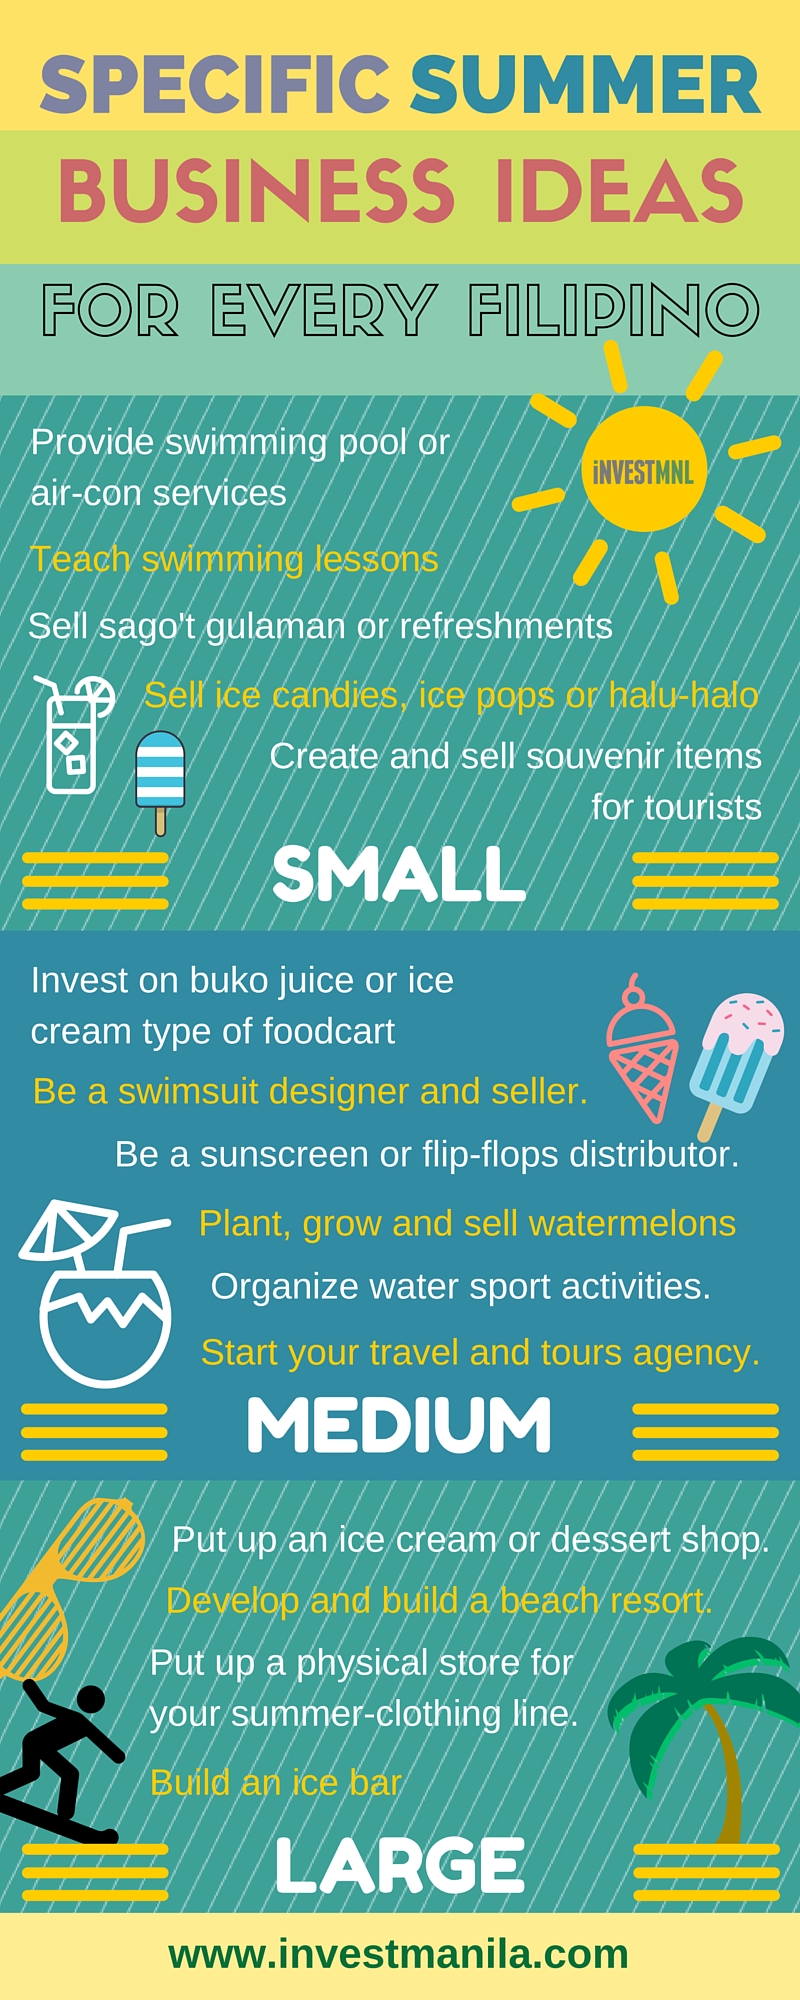 15 Specific Summer Business Ideas for Every Filipino INVESTMNL